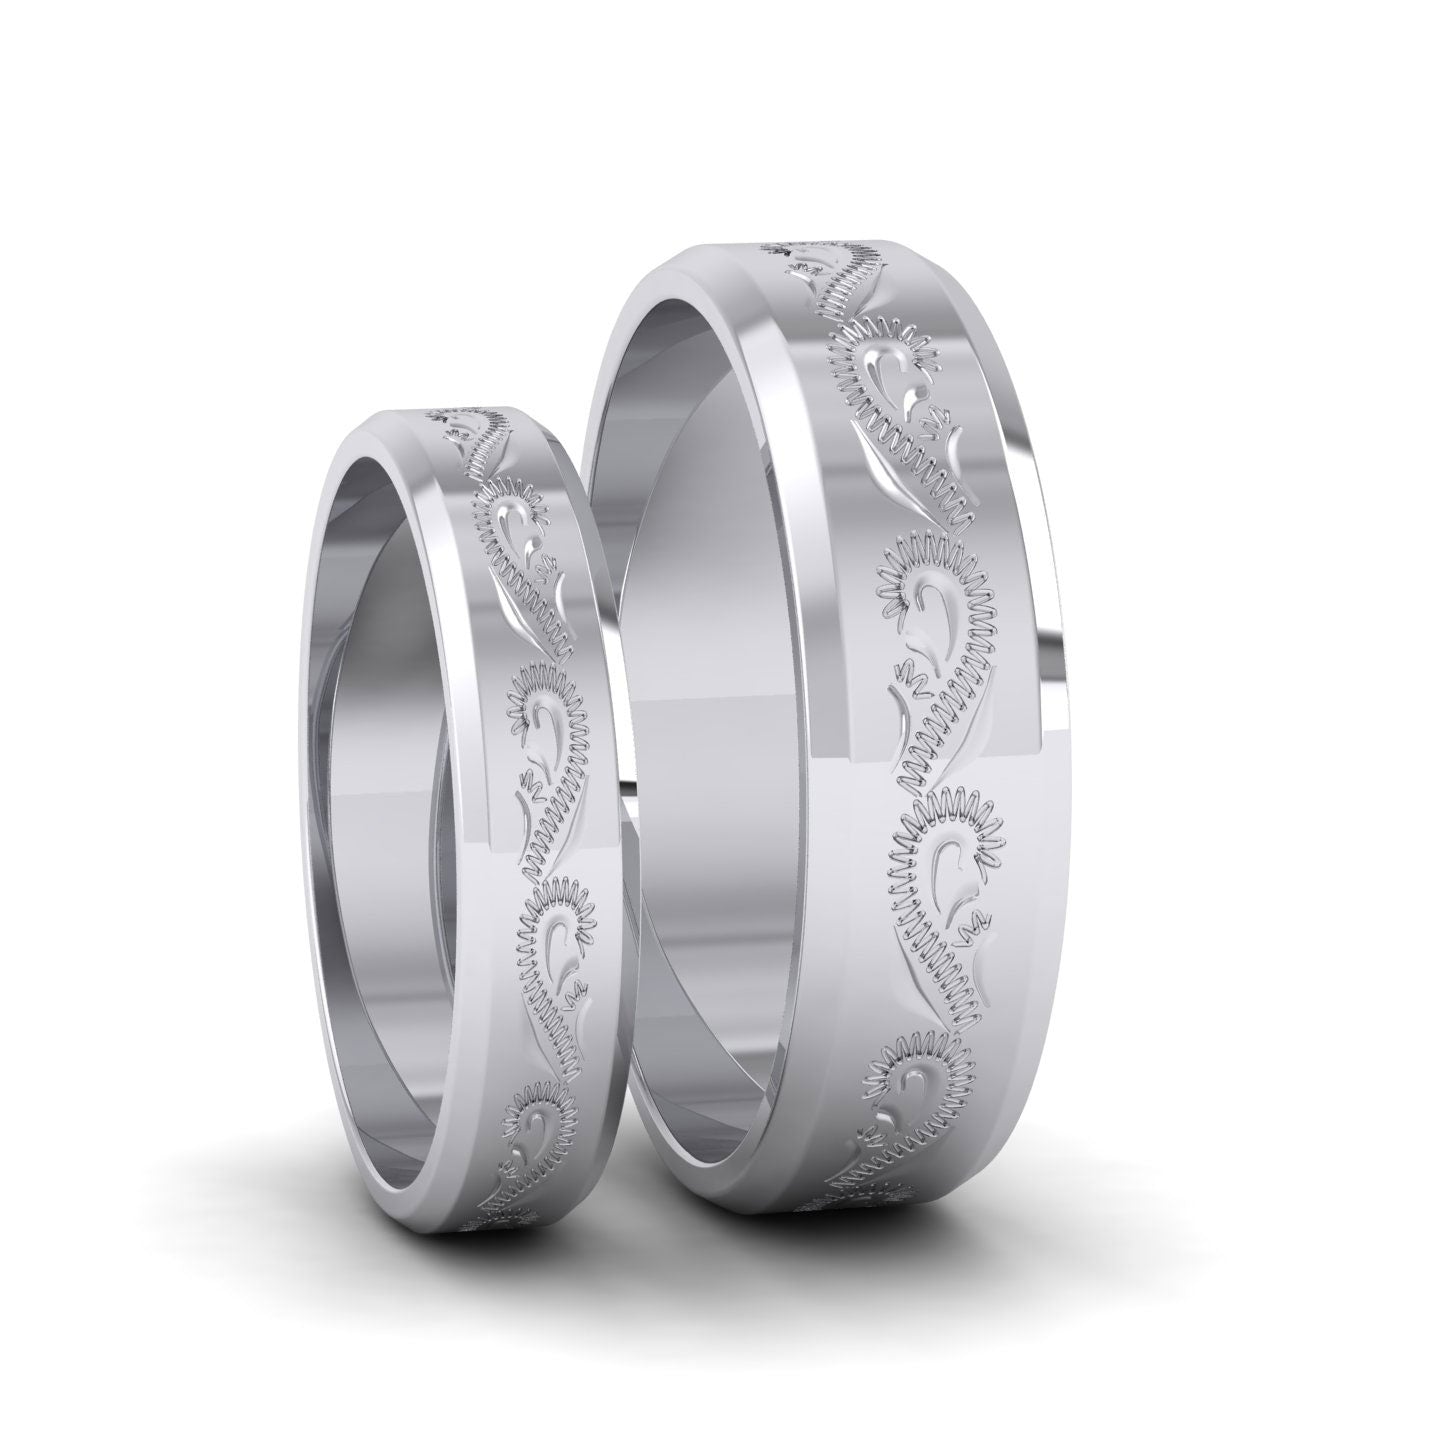 Engraved 18ct White Gold 4mm Flat Wedding Ring With Bevelled Edge